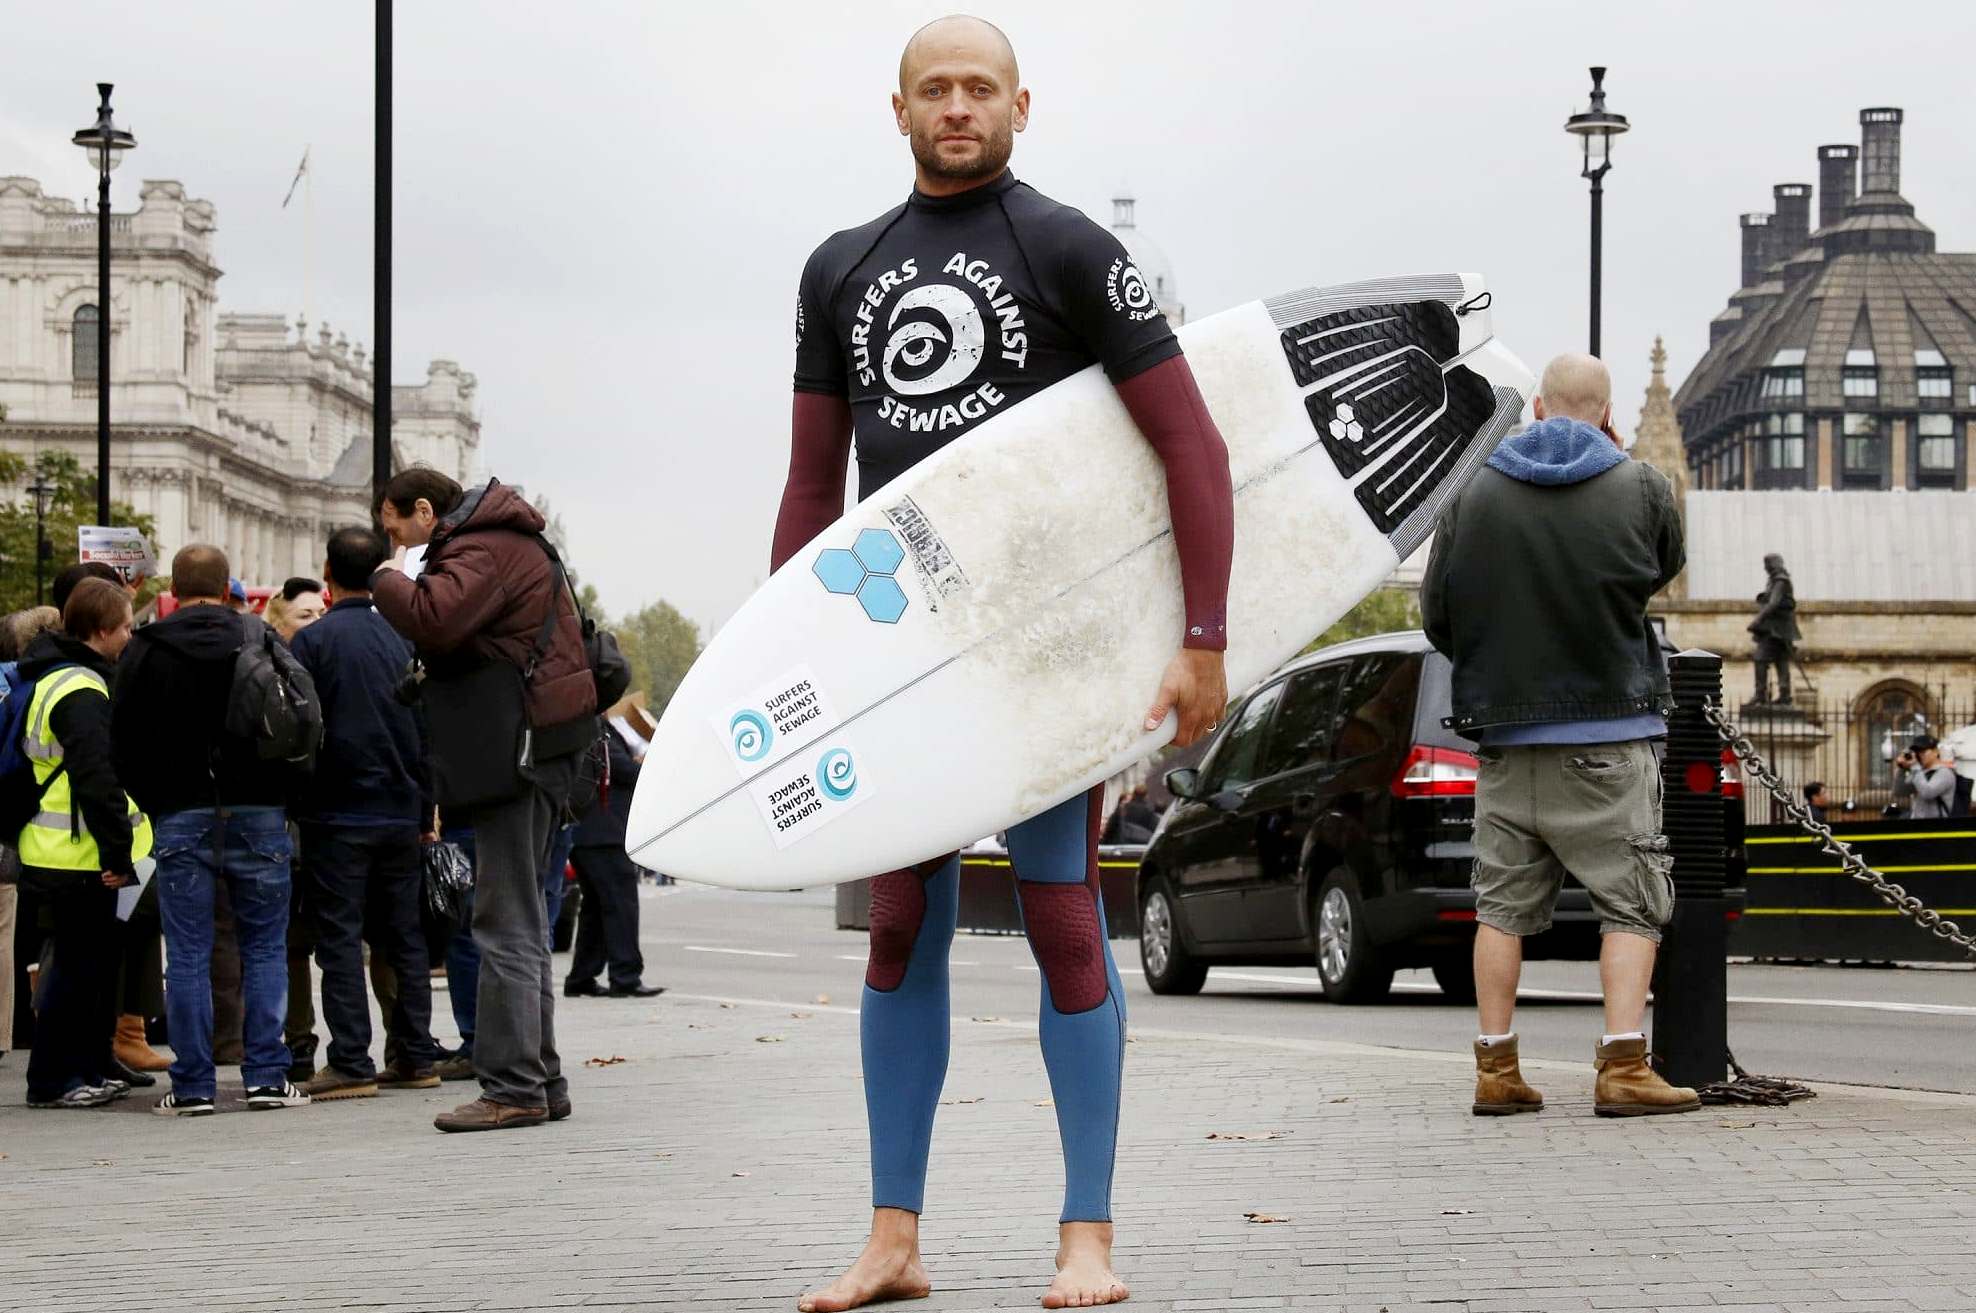 Hugo Tagholm with his surfboard